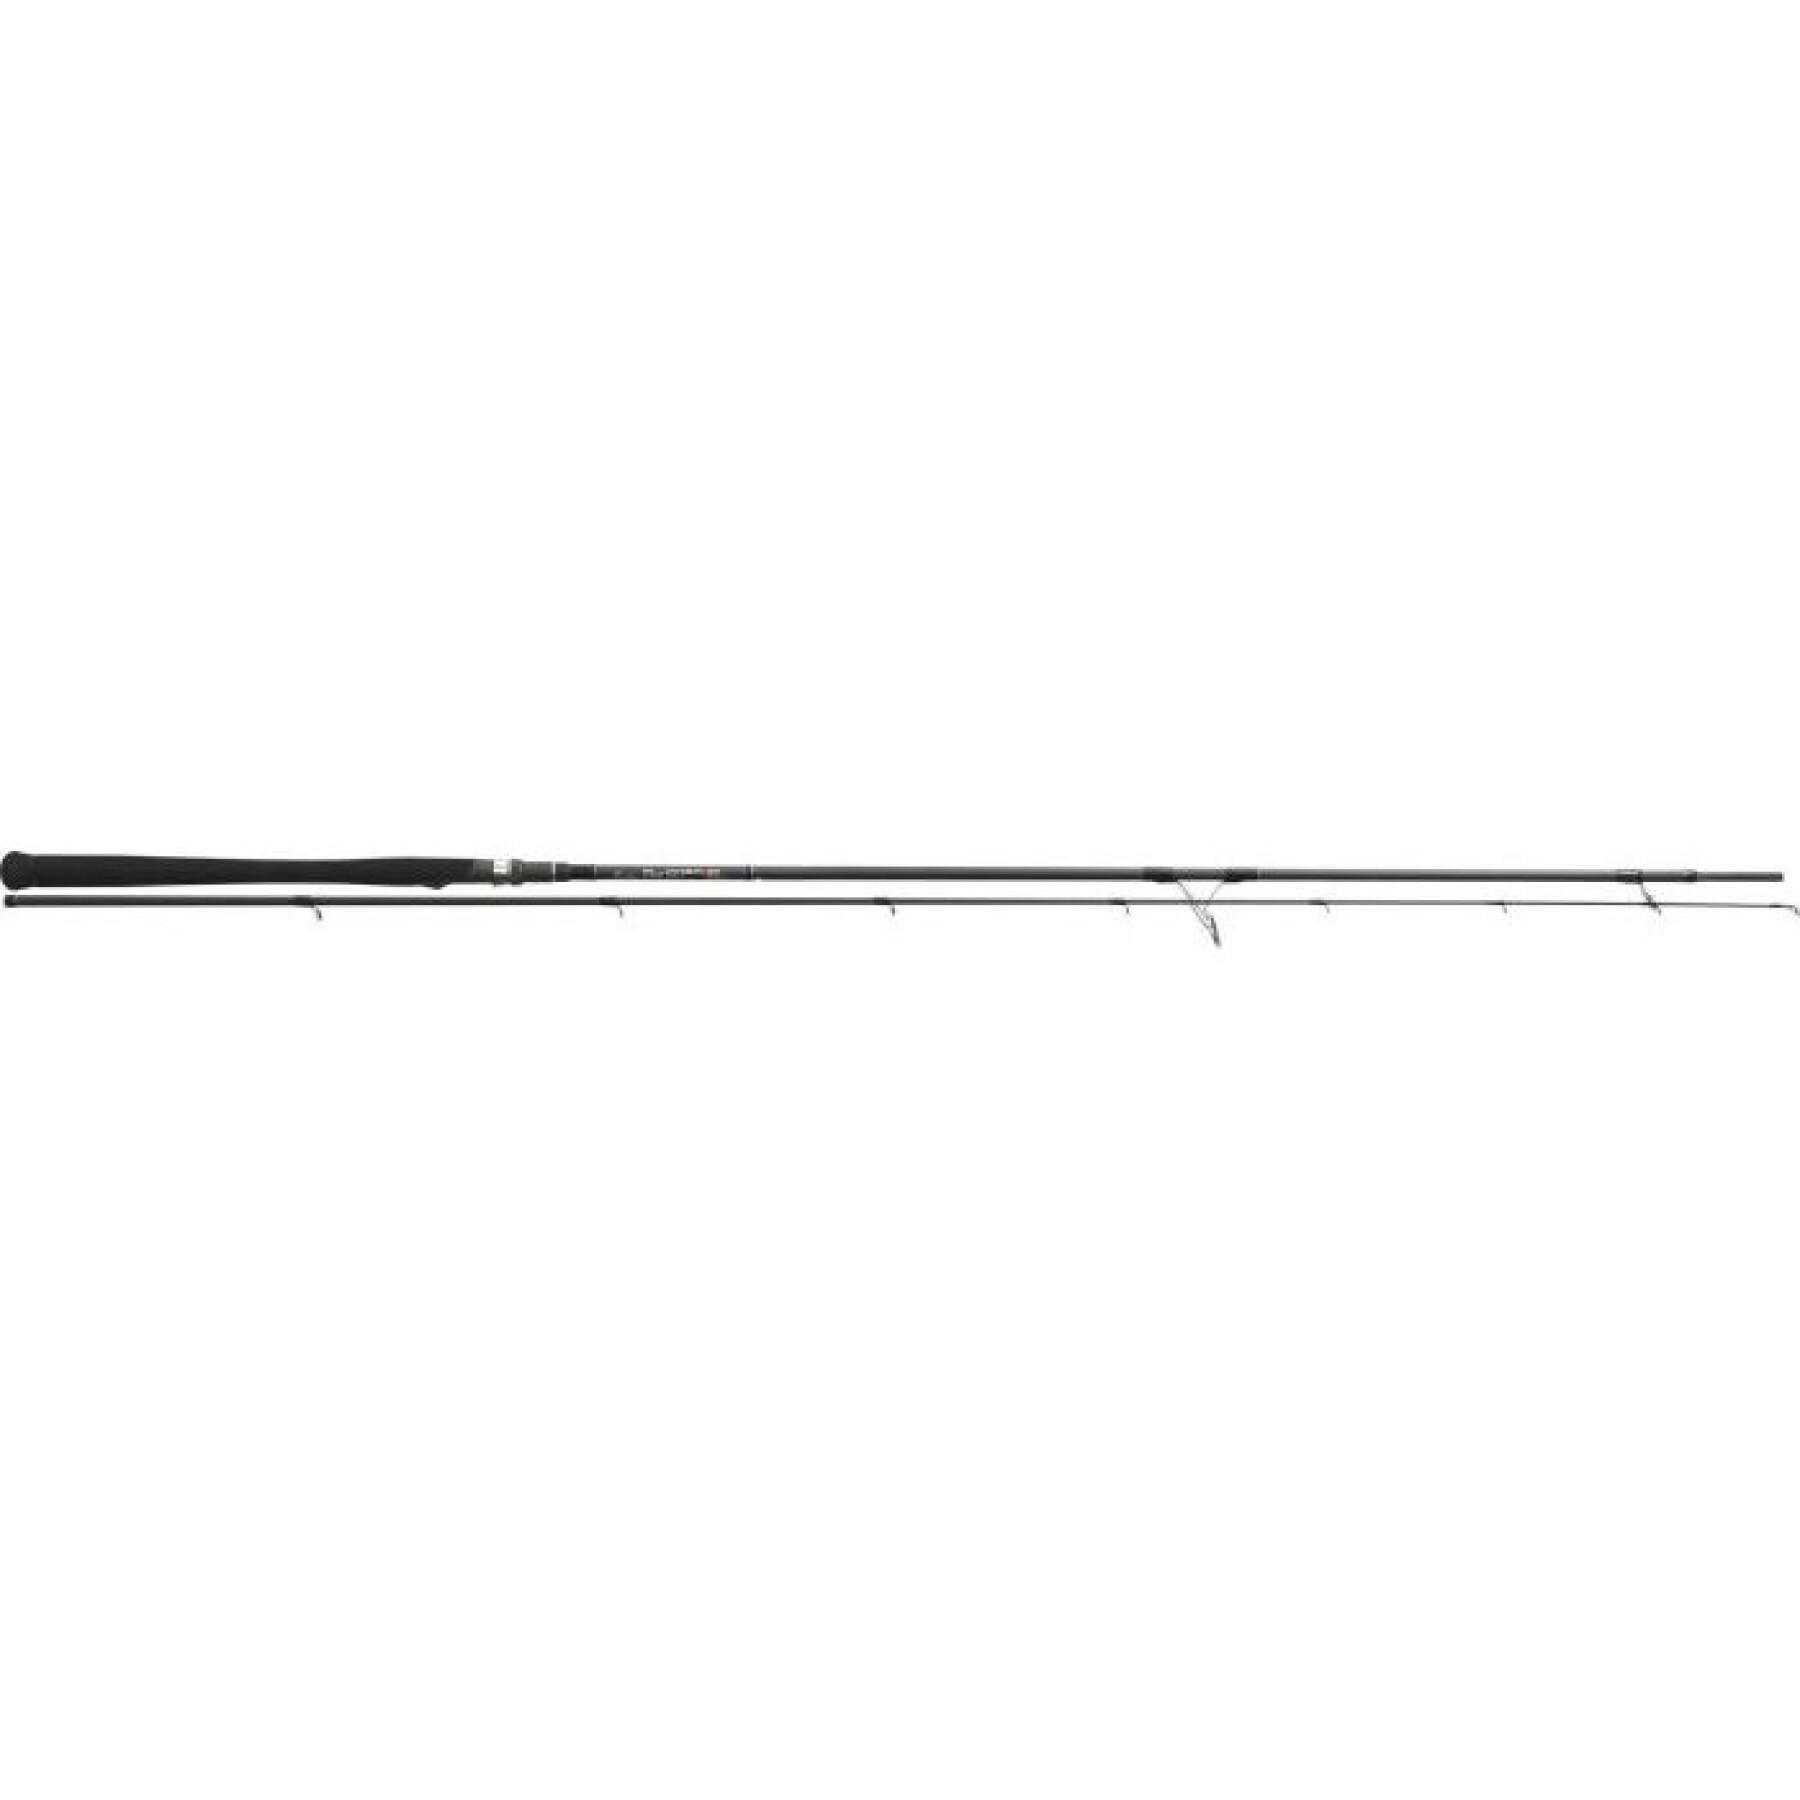 Canna da spinning Ultimate Fishing Five Sp 95 Mh 181g